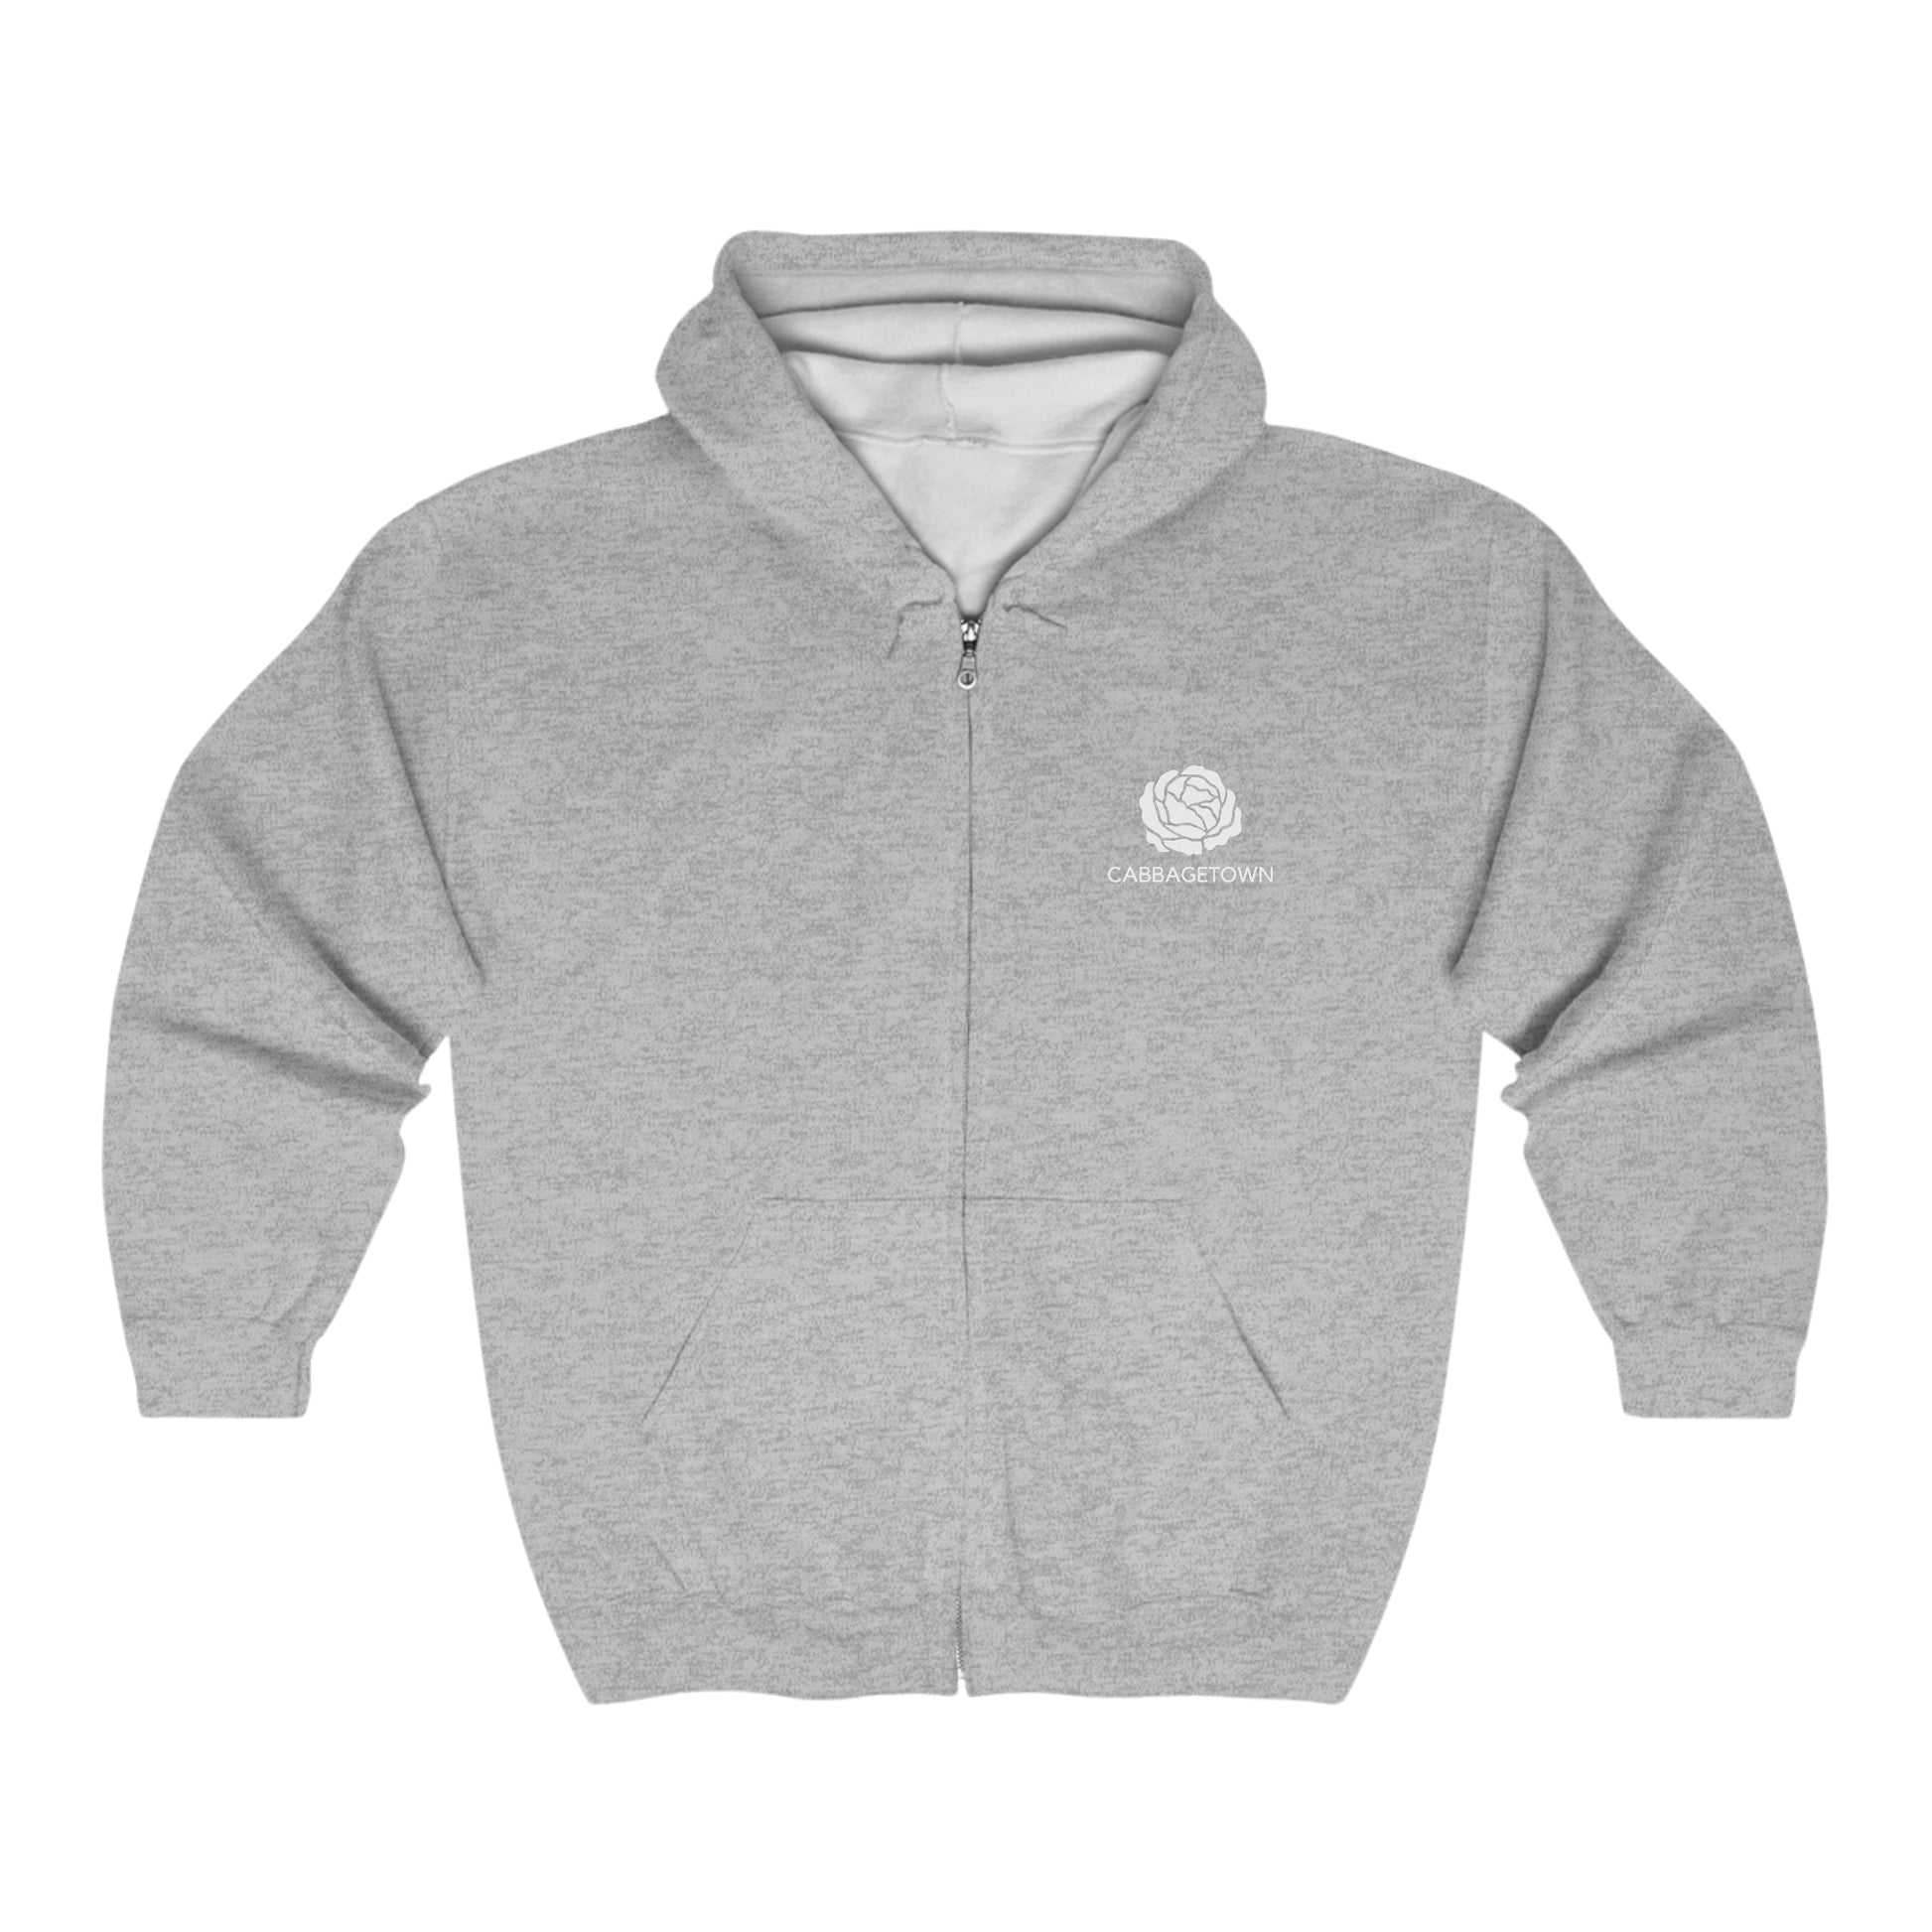 Gray zip-up hoodie with a hood, featuring a small logo on the left chest area that reads "Printify." The Unisex Heavy Blend™ Full Zip Hooded Sweatshirt is displayed on a plain white background in Toronto.